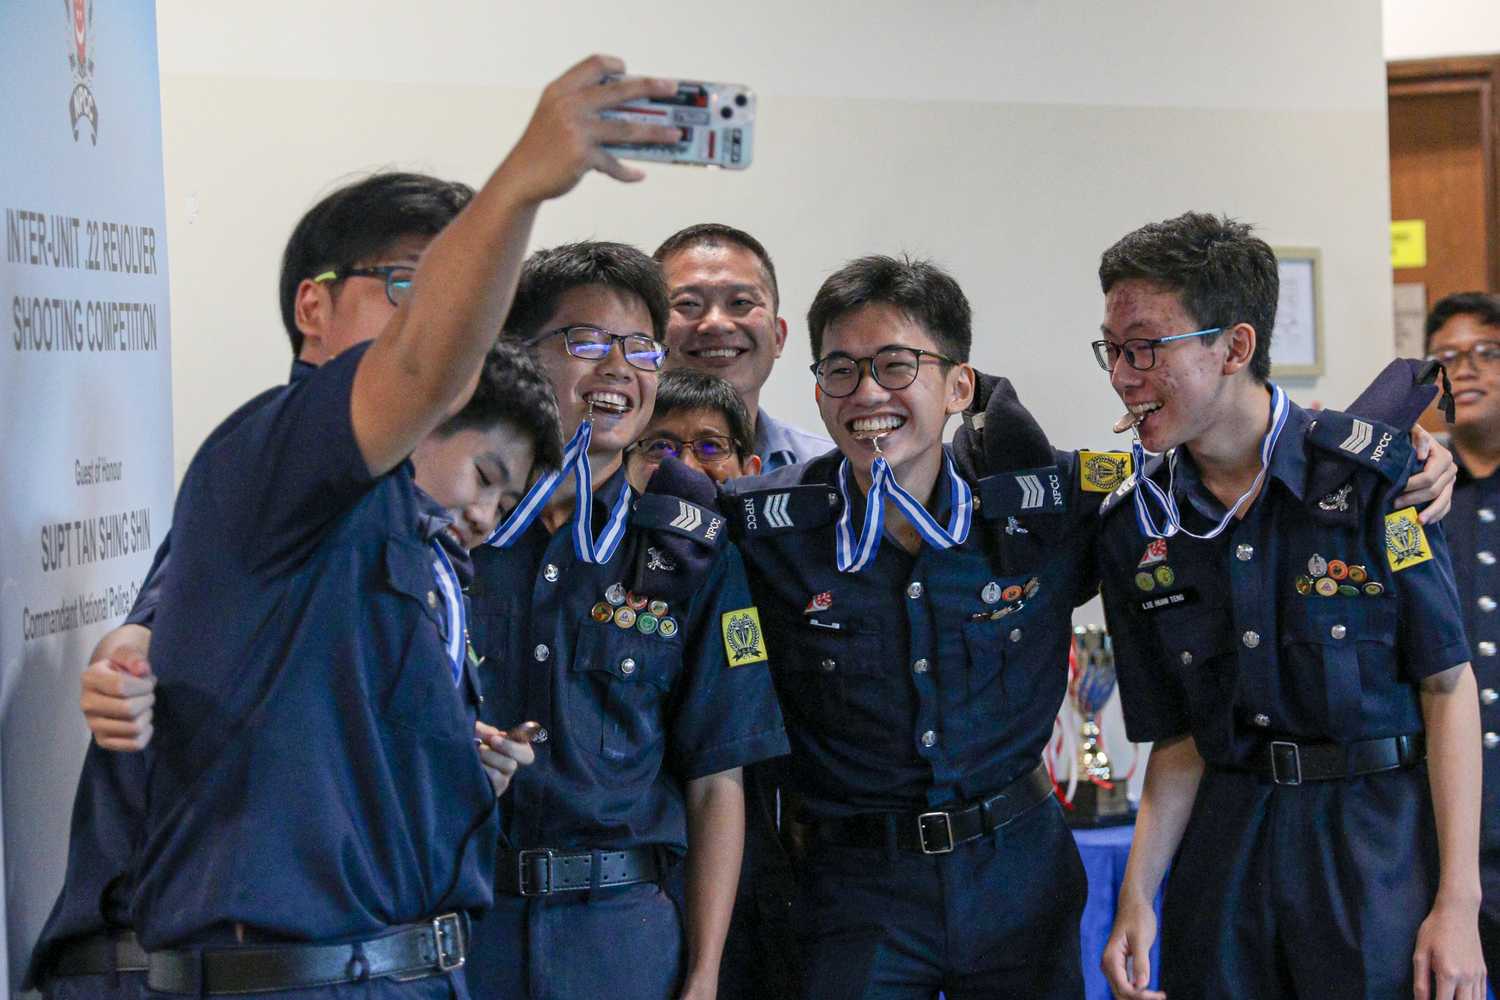 Group of male NPCC Cadets posing by biting their medals, and taking a selfie with their Teacher Officer excitedly after the award ceremony ended.